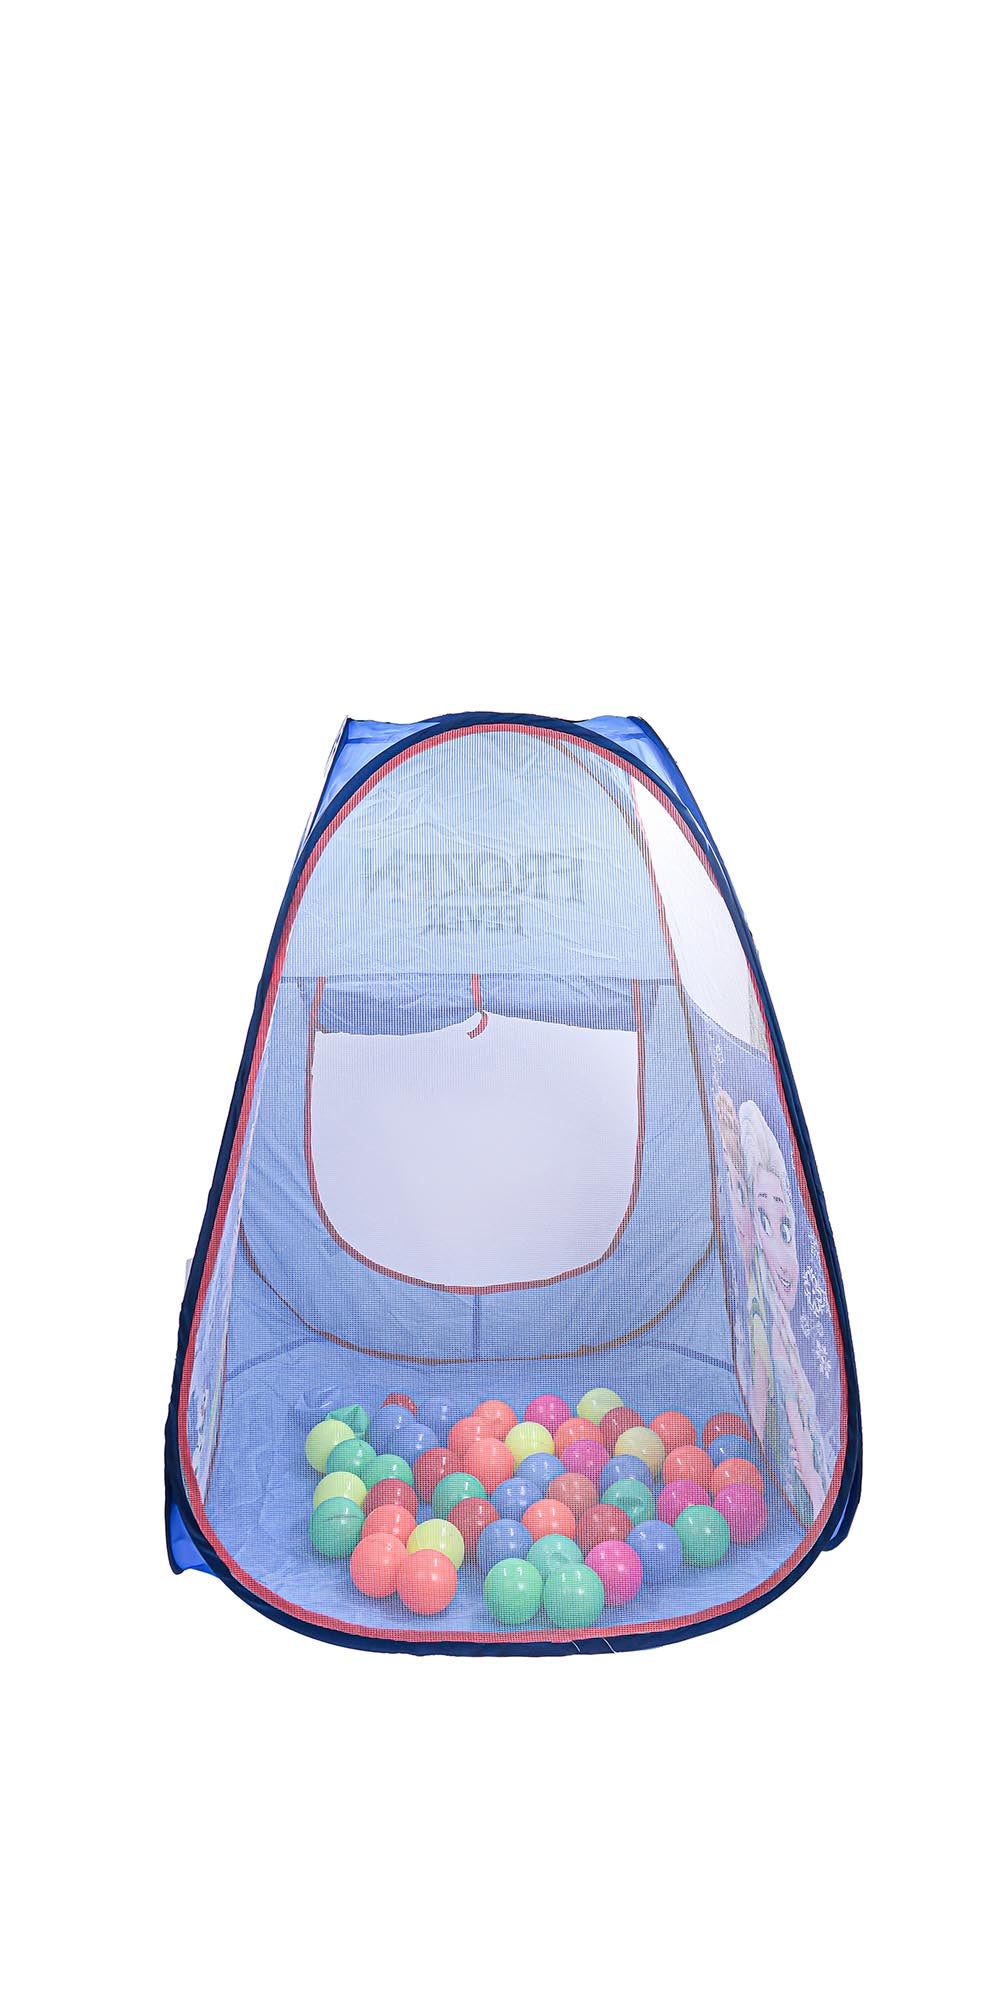 Kids Tent with Balls